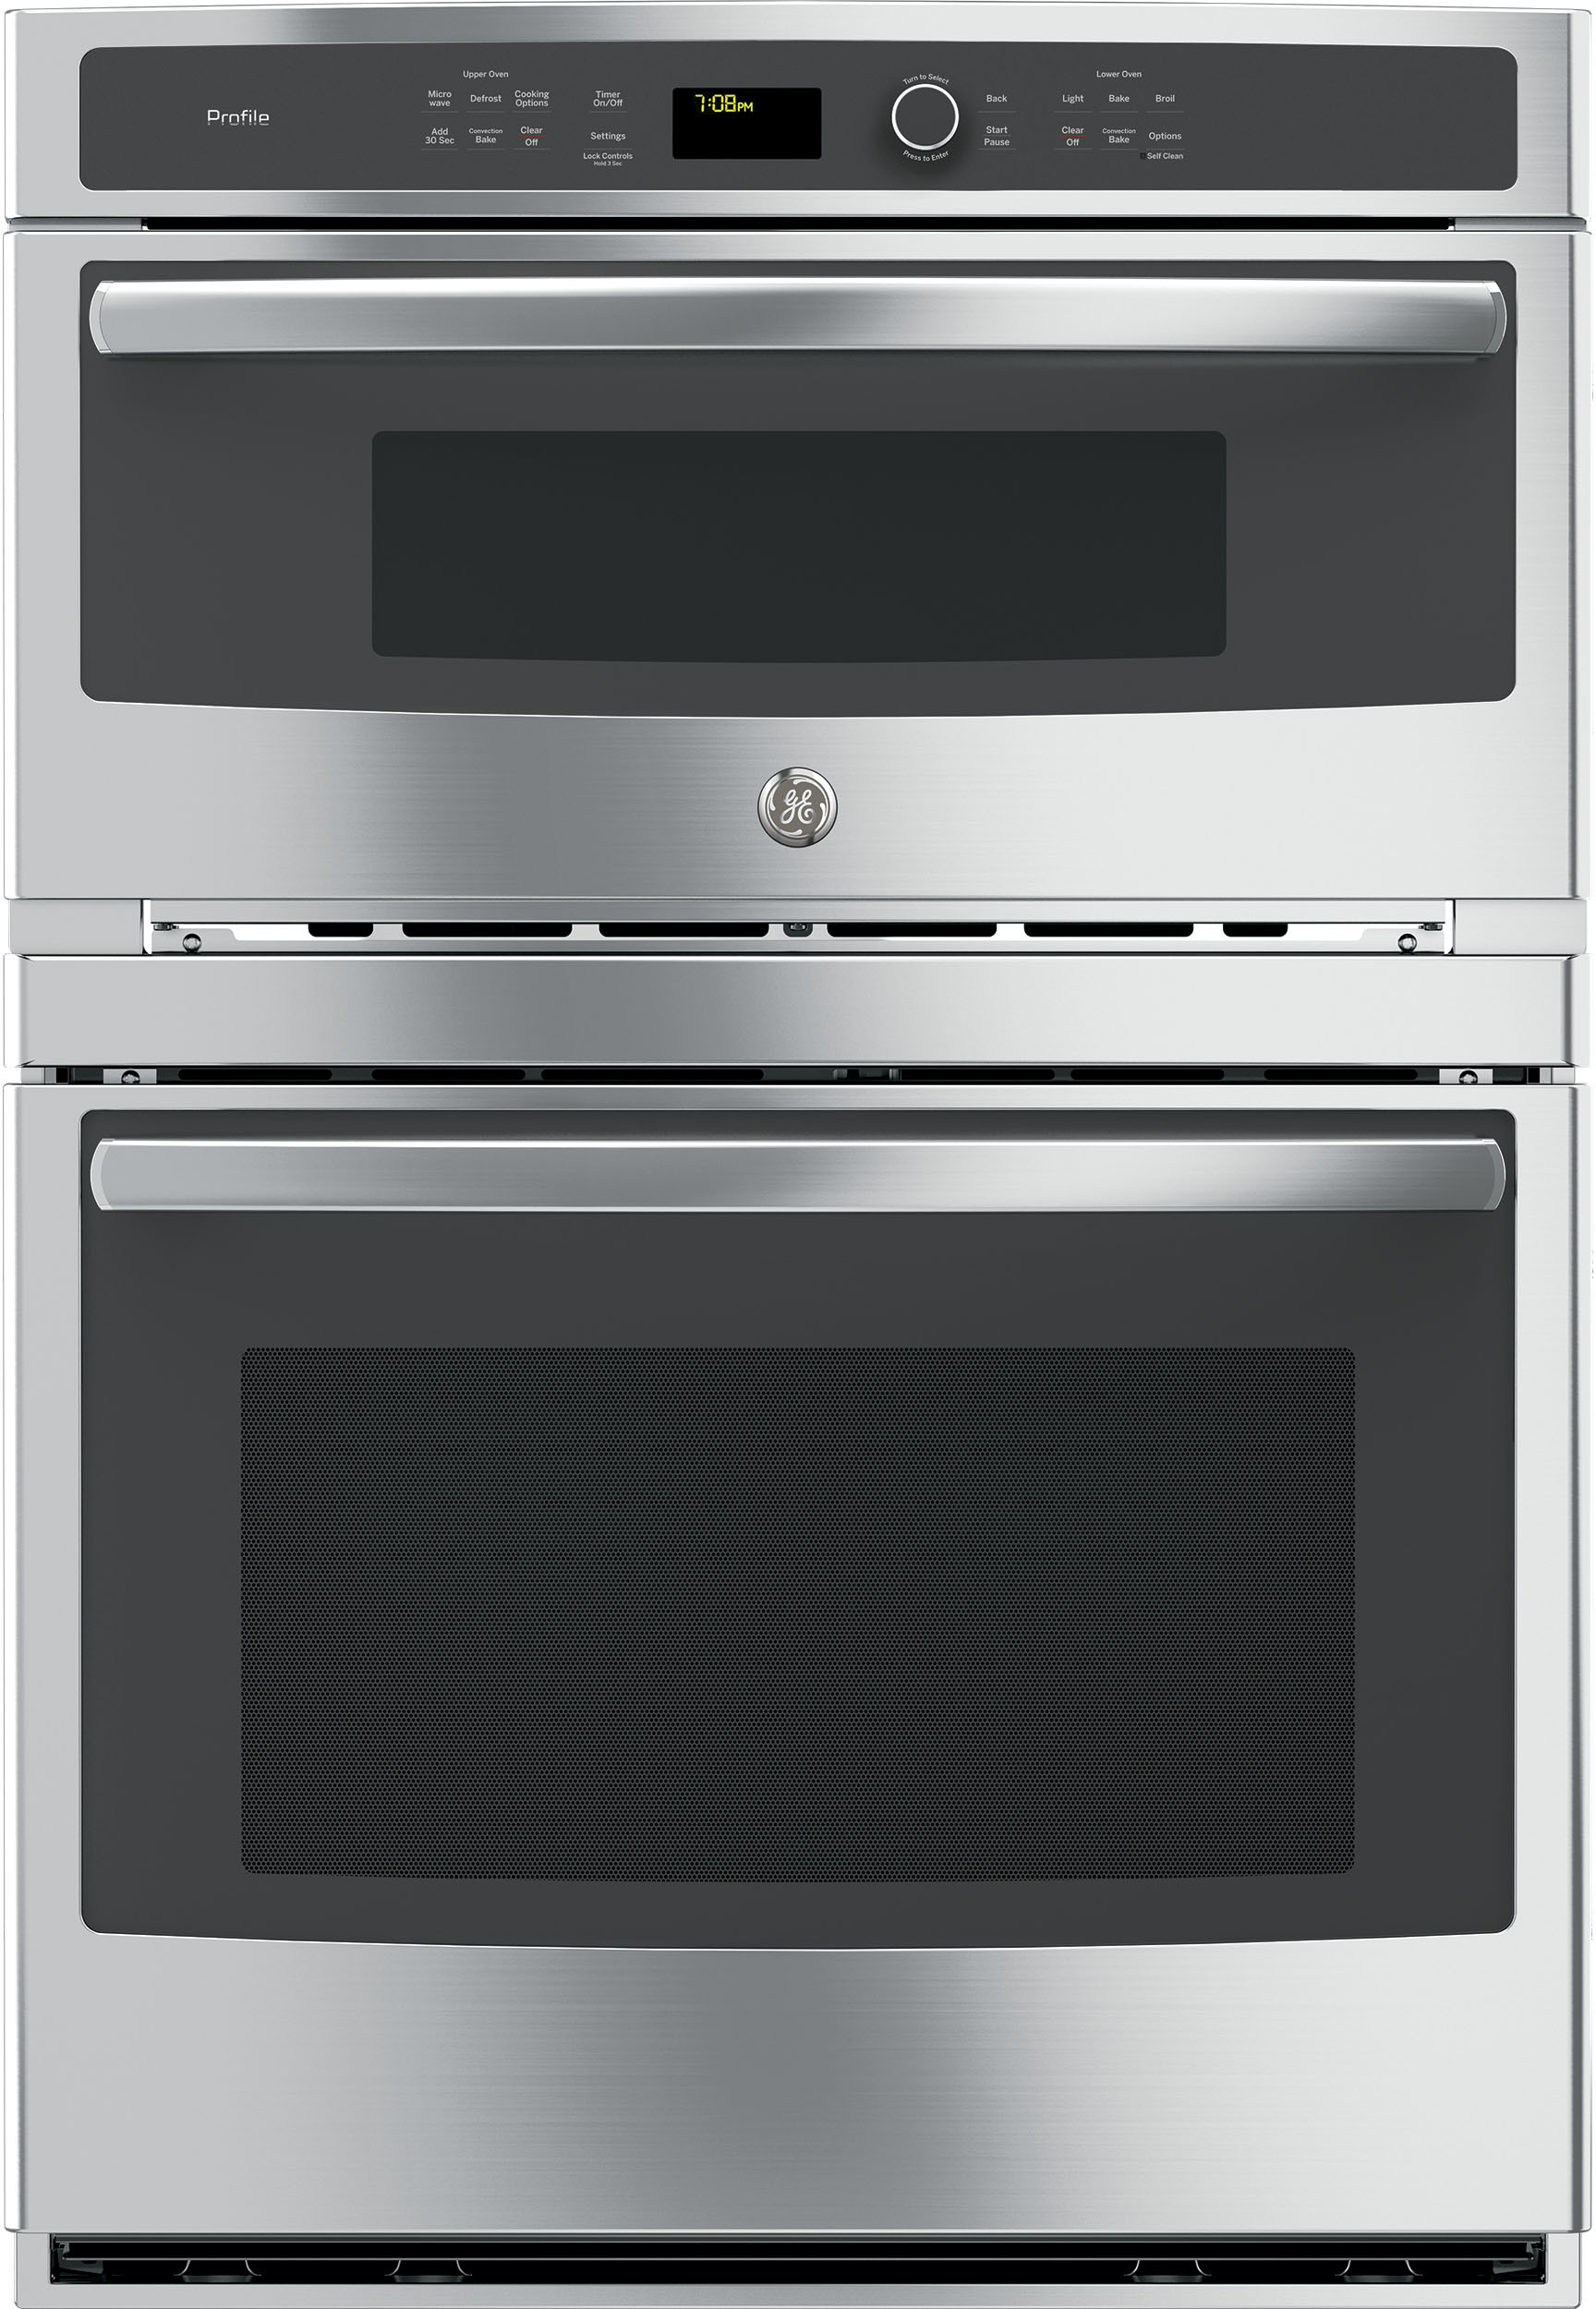 Profile 30"" Double Electric Combination Wall Oven - GE PT7800SHSS